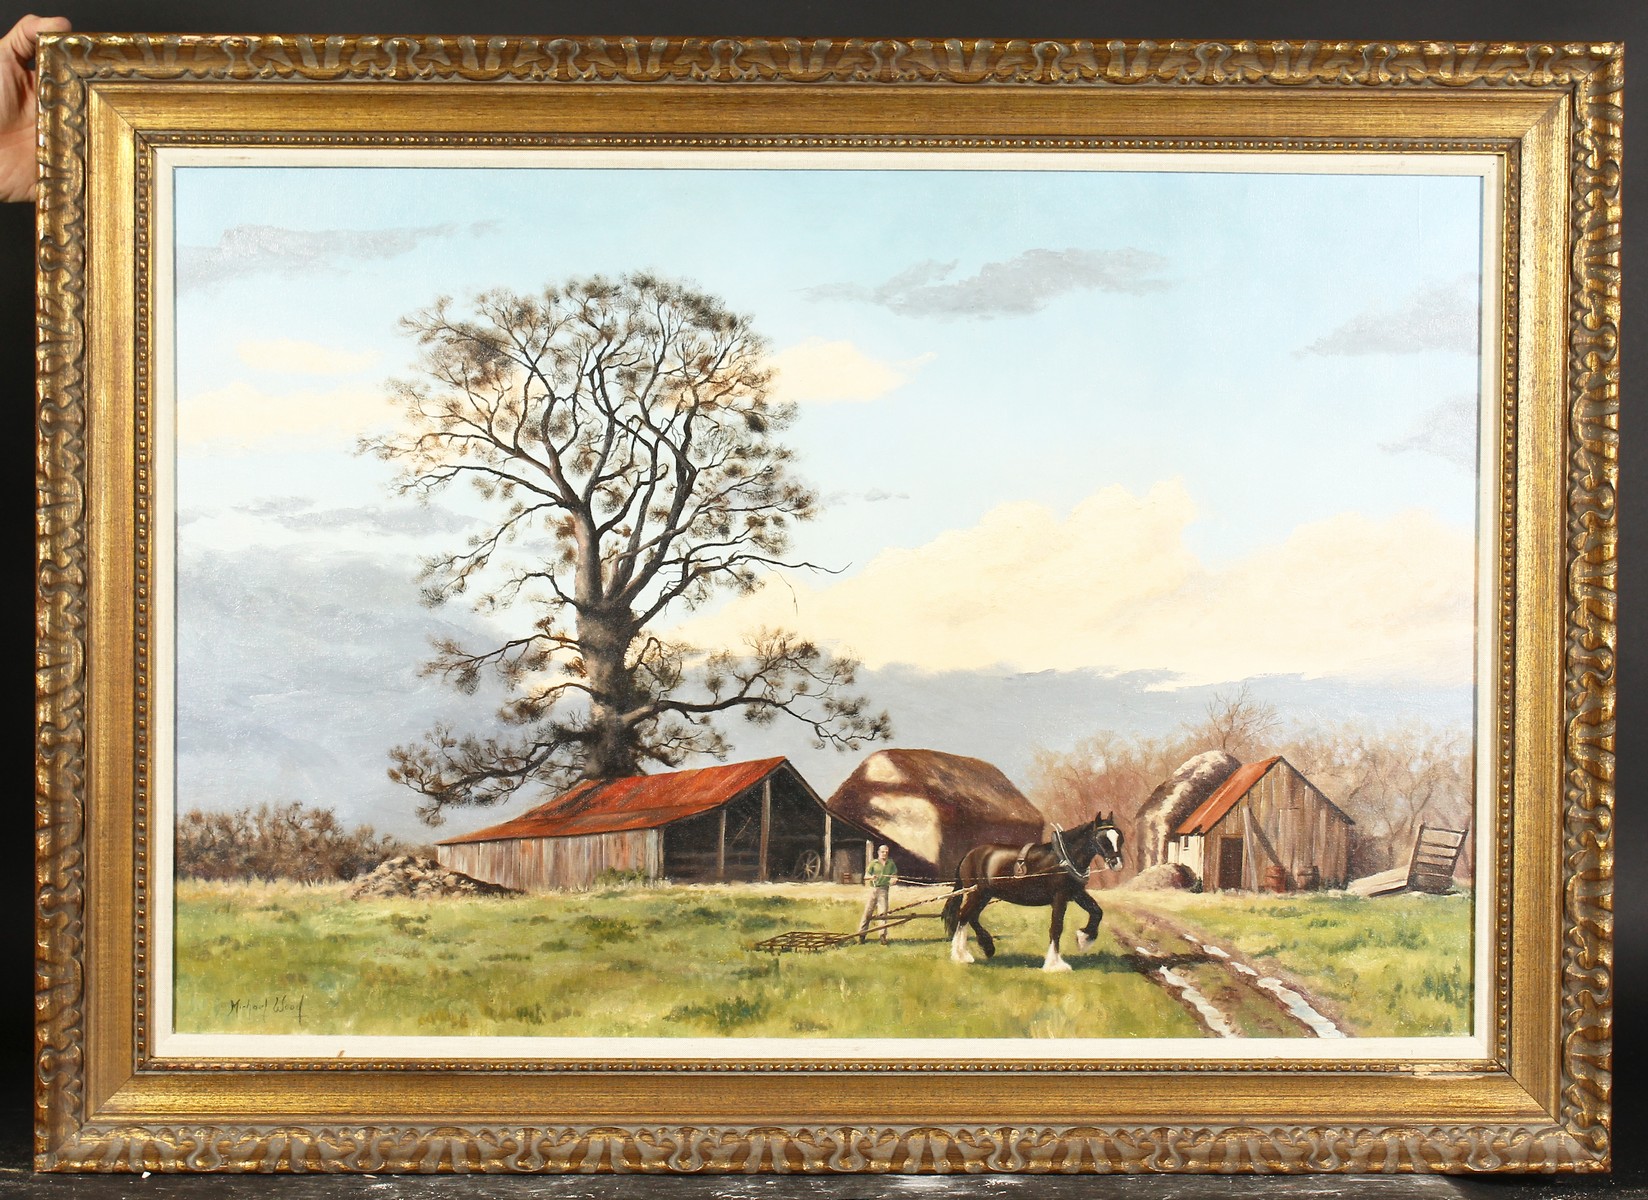 Michael Wood (20th century), a farmer with a horse and plough amongst farm buildings, oil on canvas, - Image 2 of 4